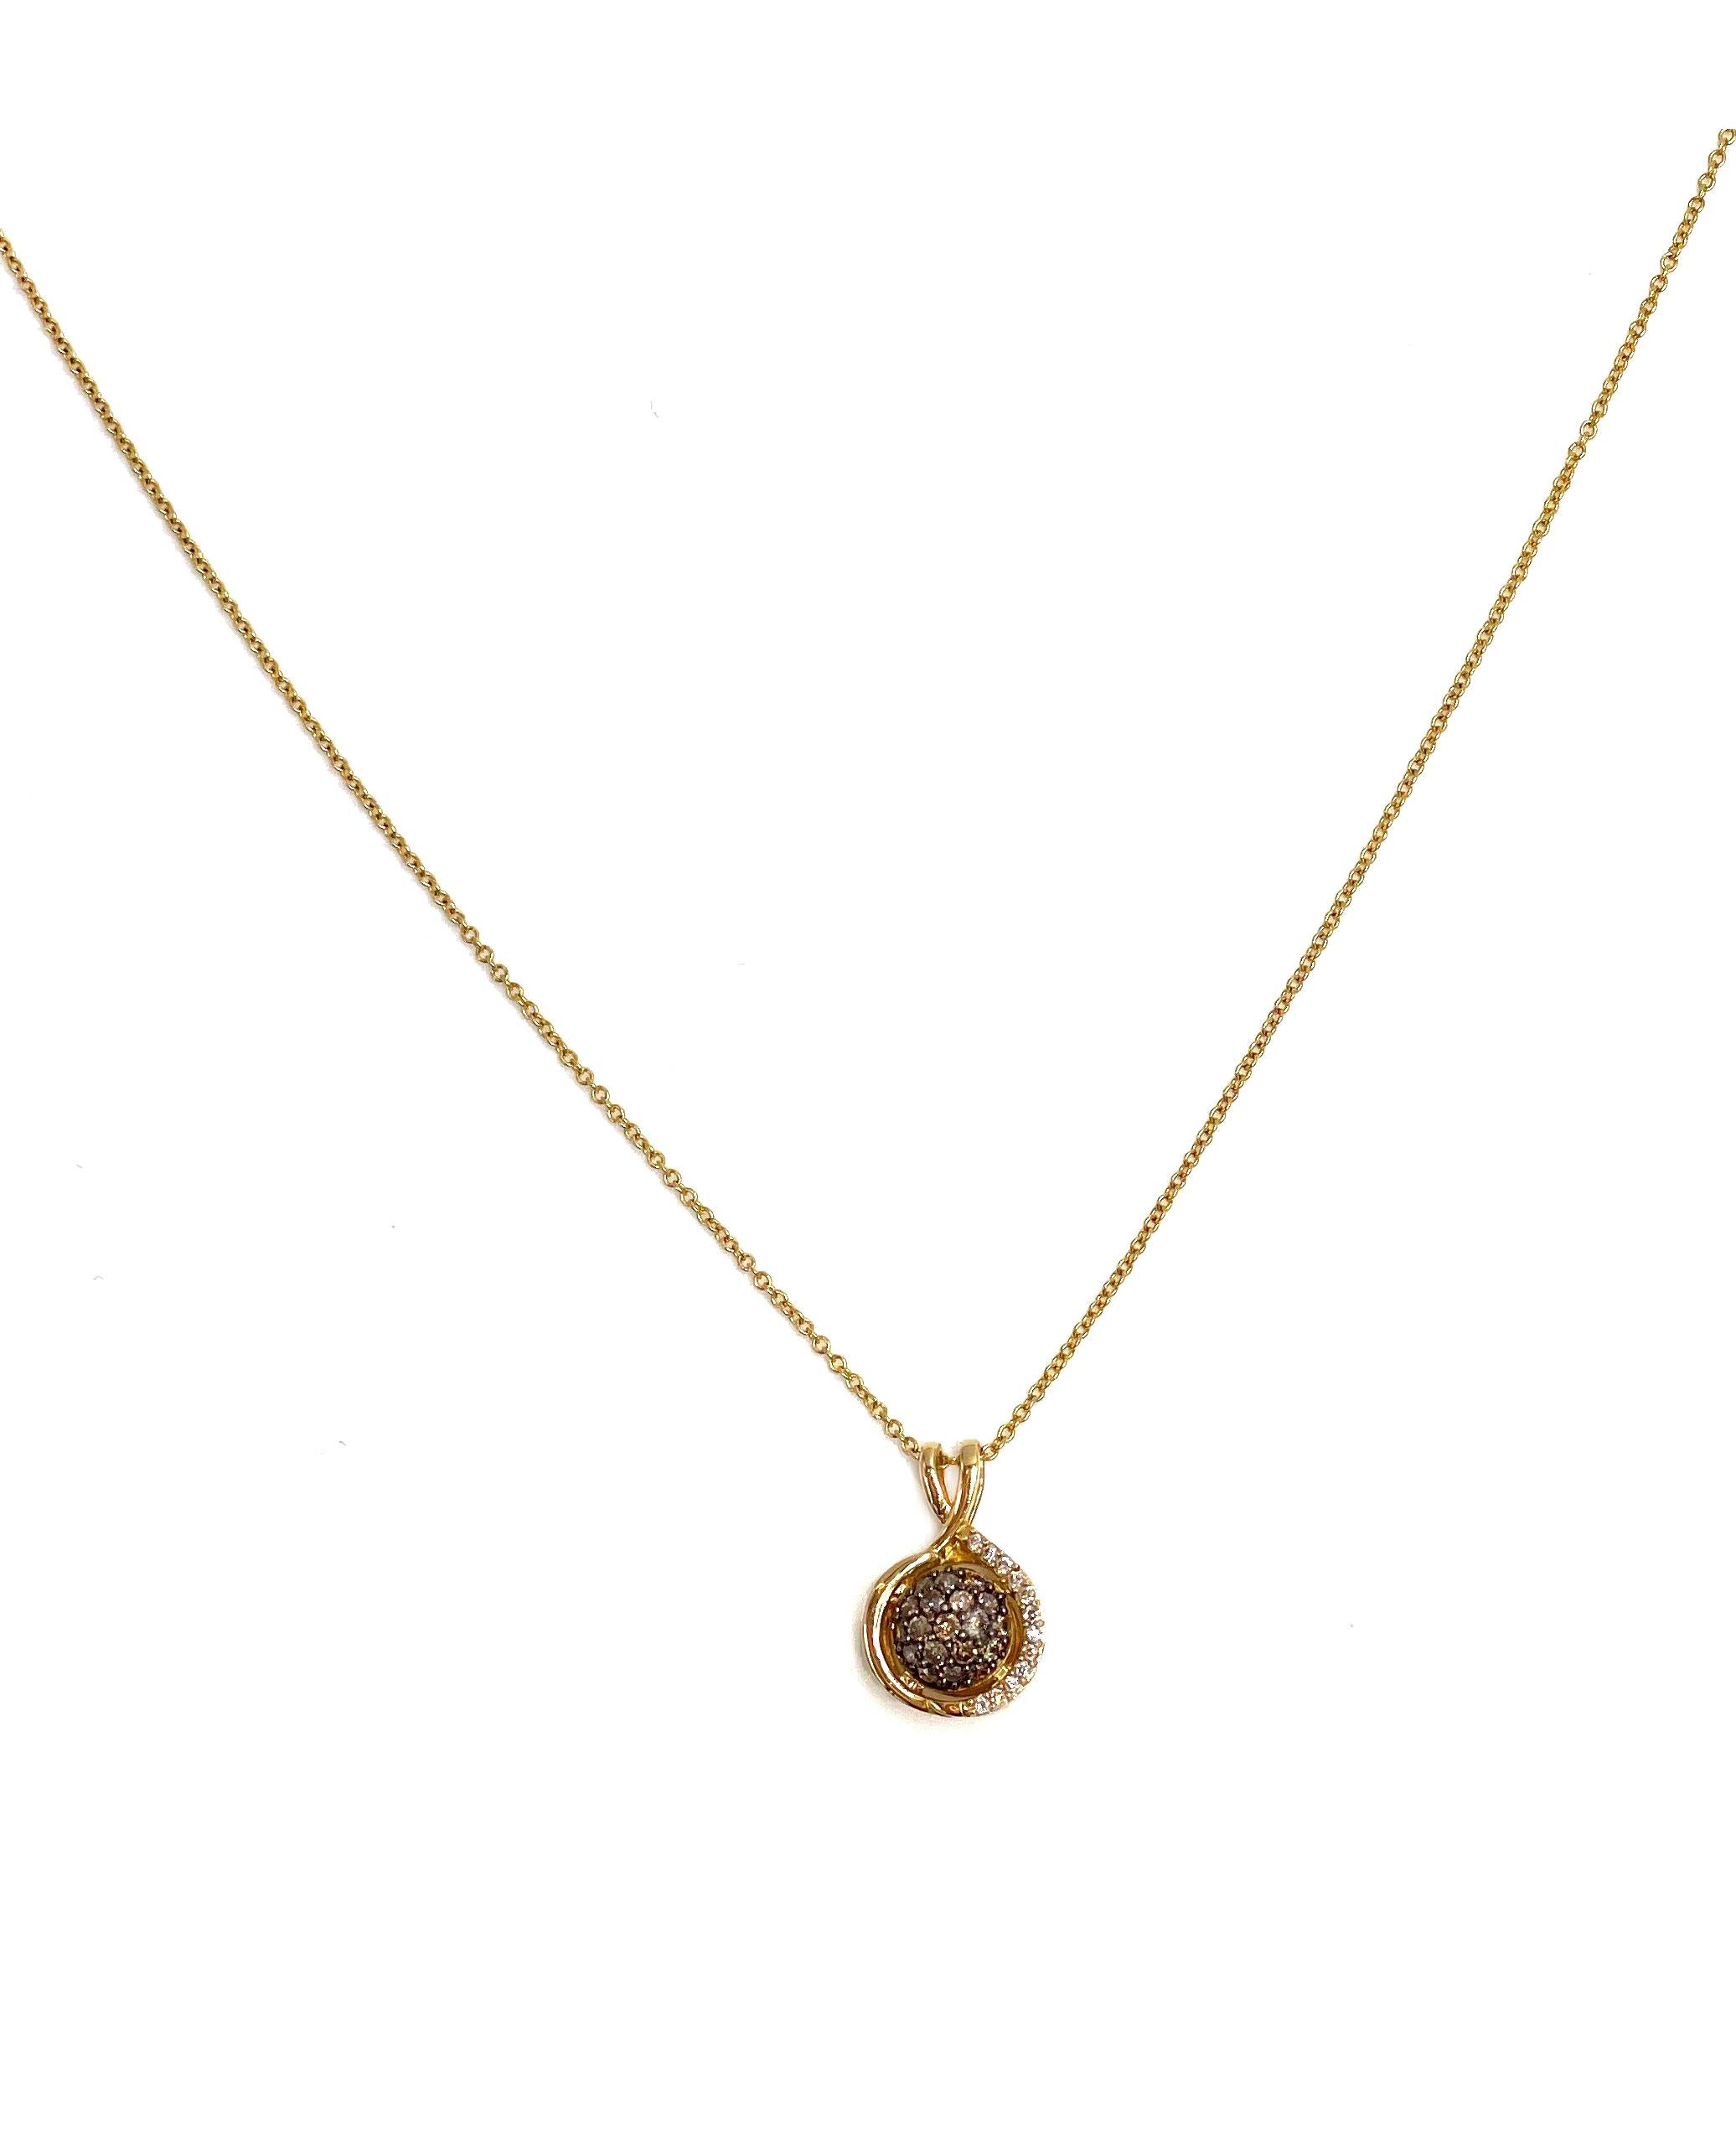 Le Vian 14k yellow gold necklace with white and chocolate diamonds totaling 0.27 carats.

* 18 inches long